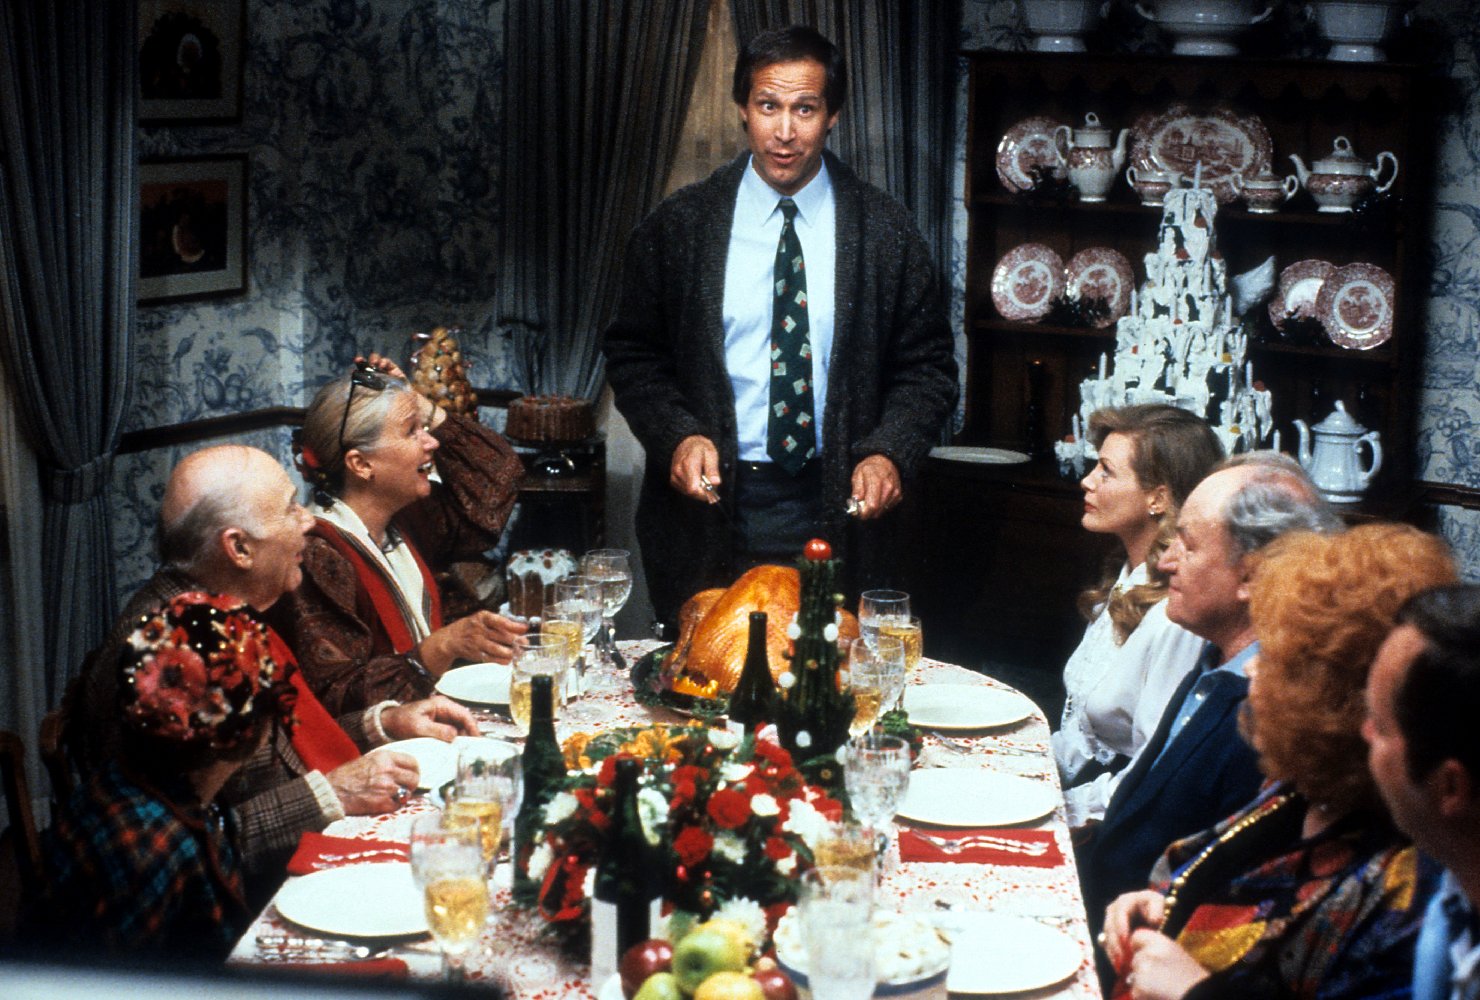 National Lampoon's Christmas Vacation (DVD), Warner Home Video, Comedy - image 3 of 7